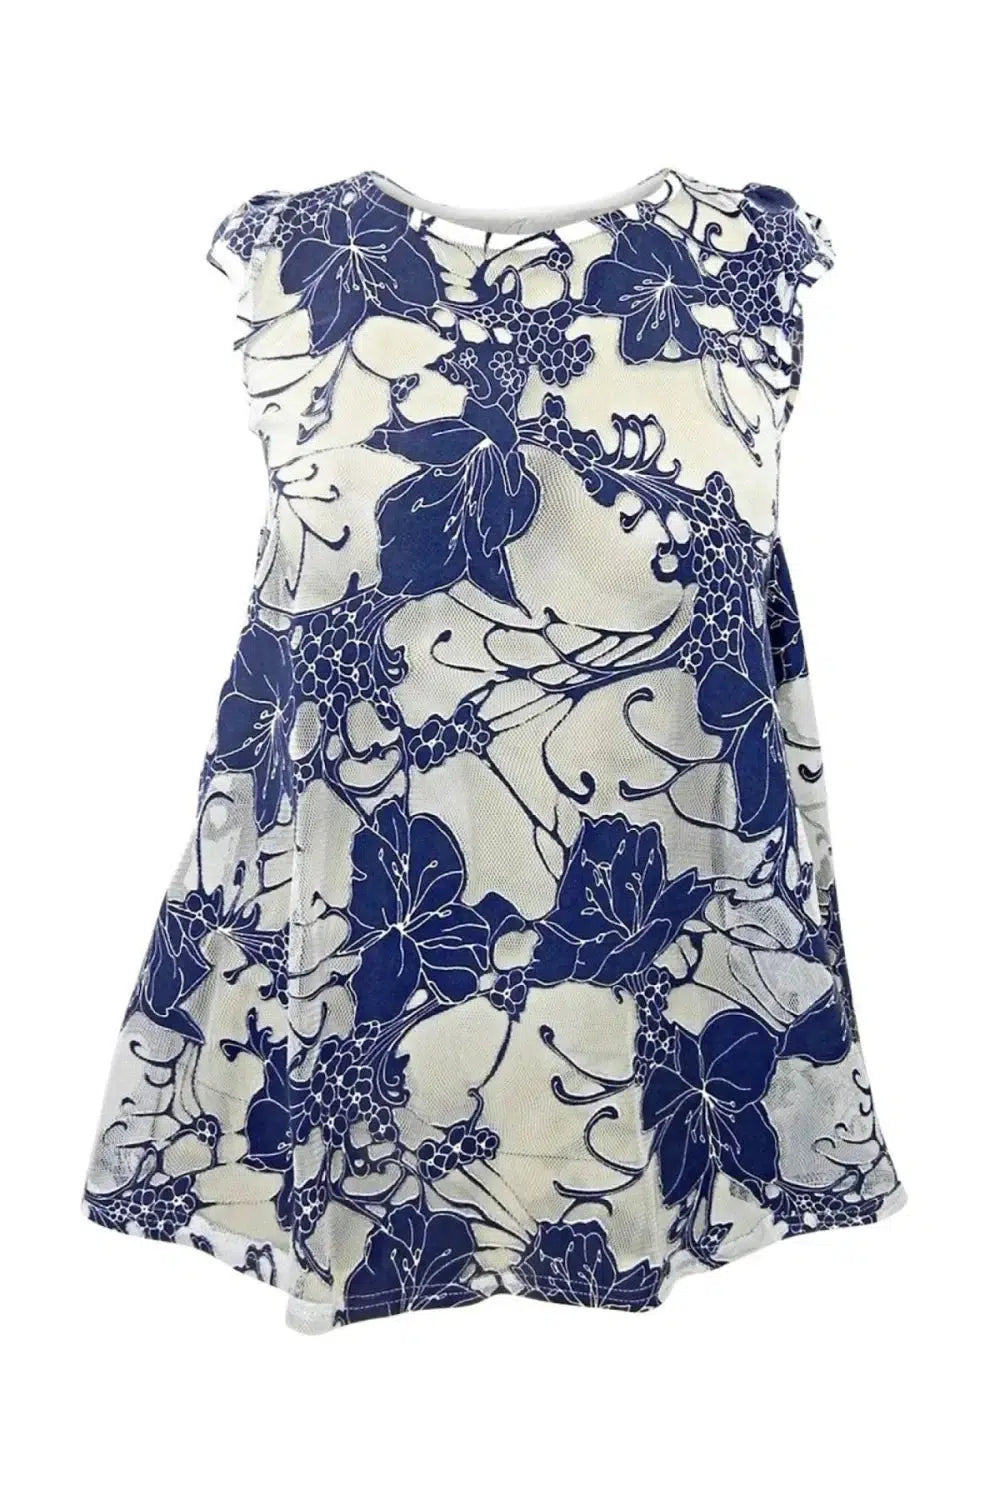 Dorothy Perkins Floral Lace Sleeveless Swing Top